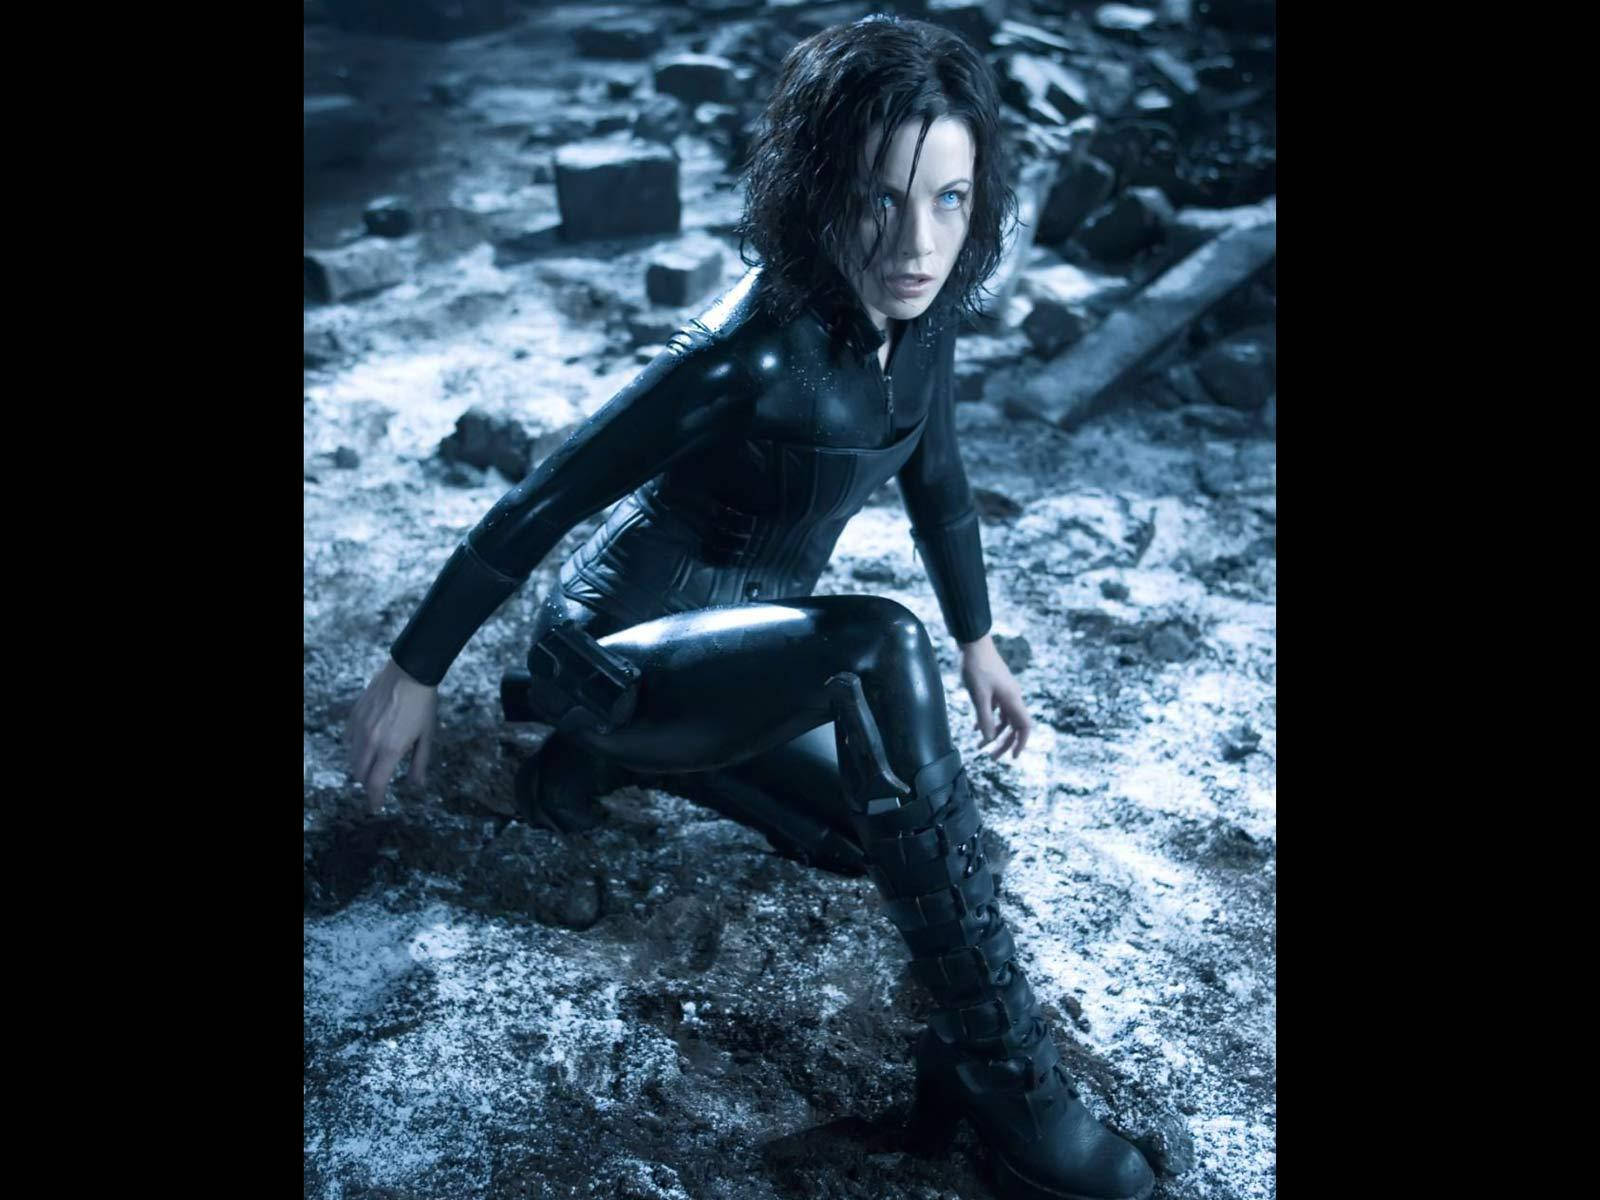 The warrior vampire Selene played by Kate Beckinsale in the Underworld series. Wallpaper